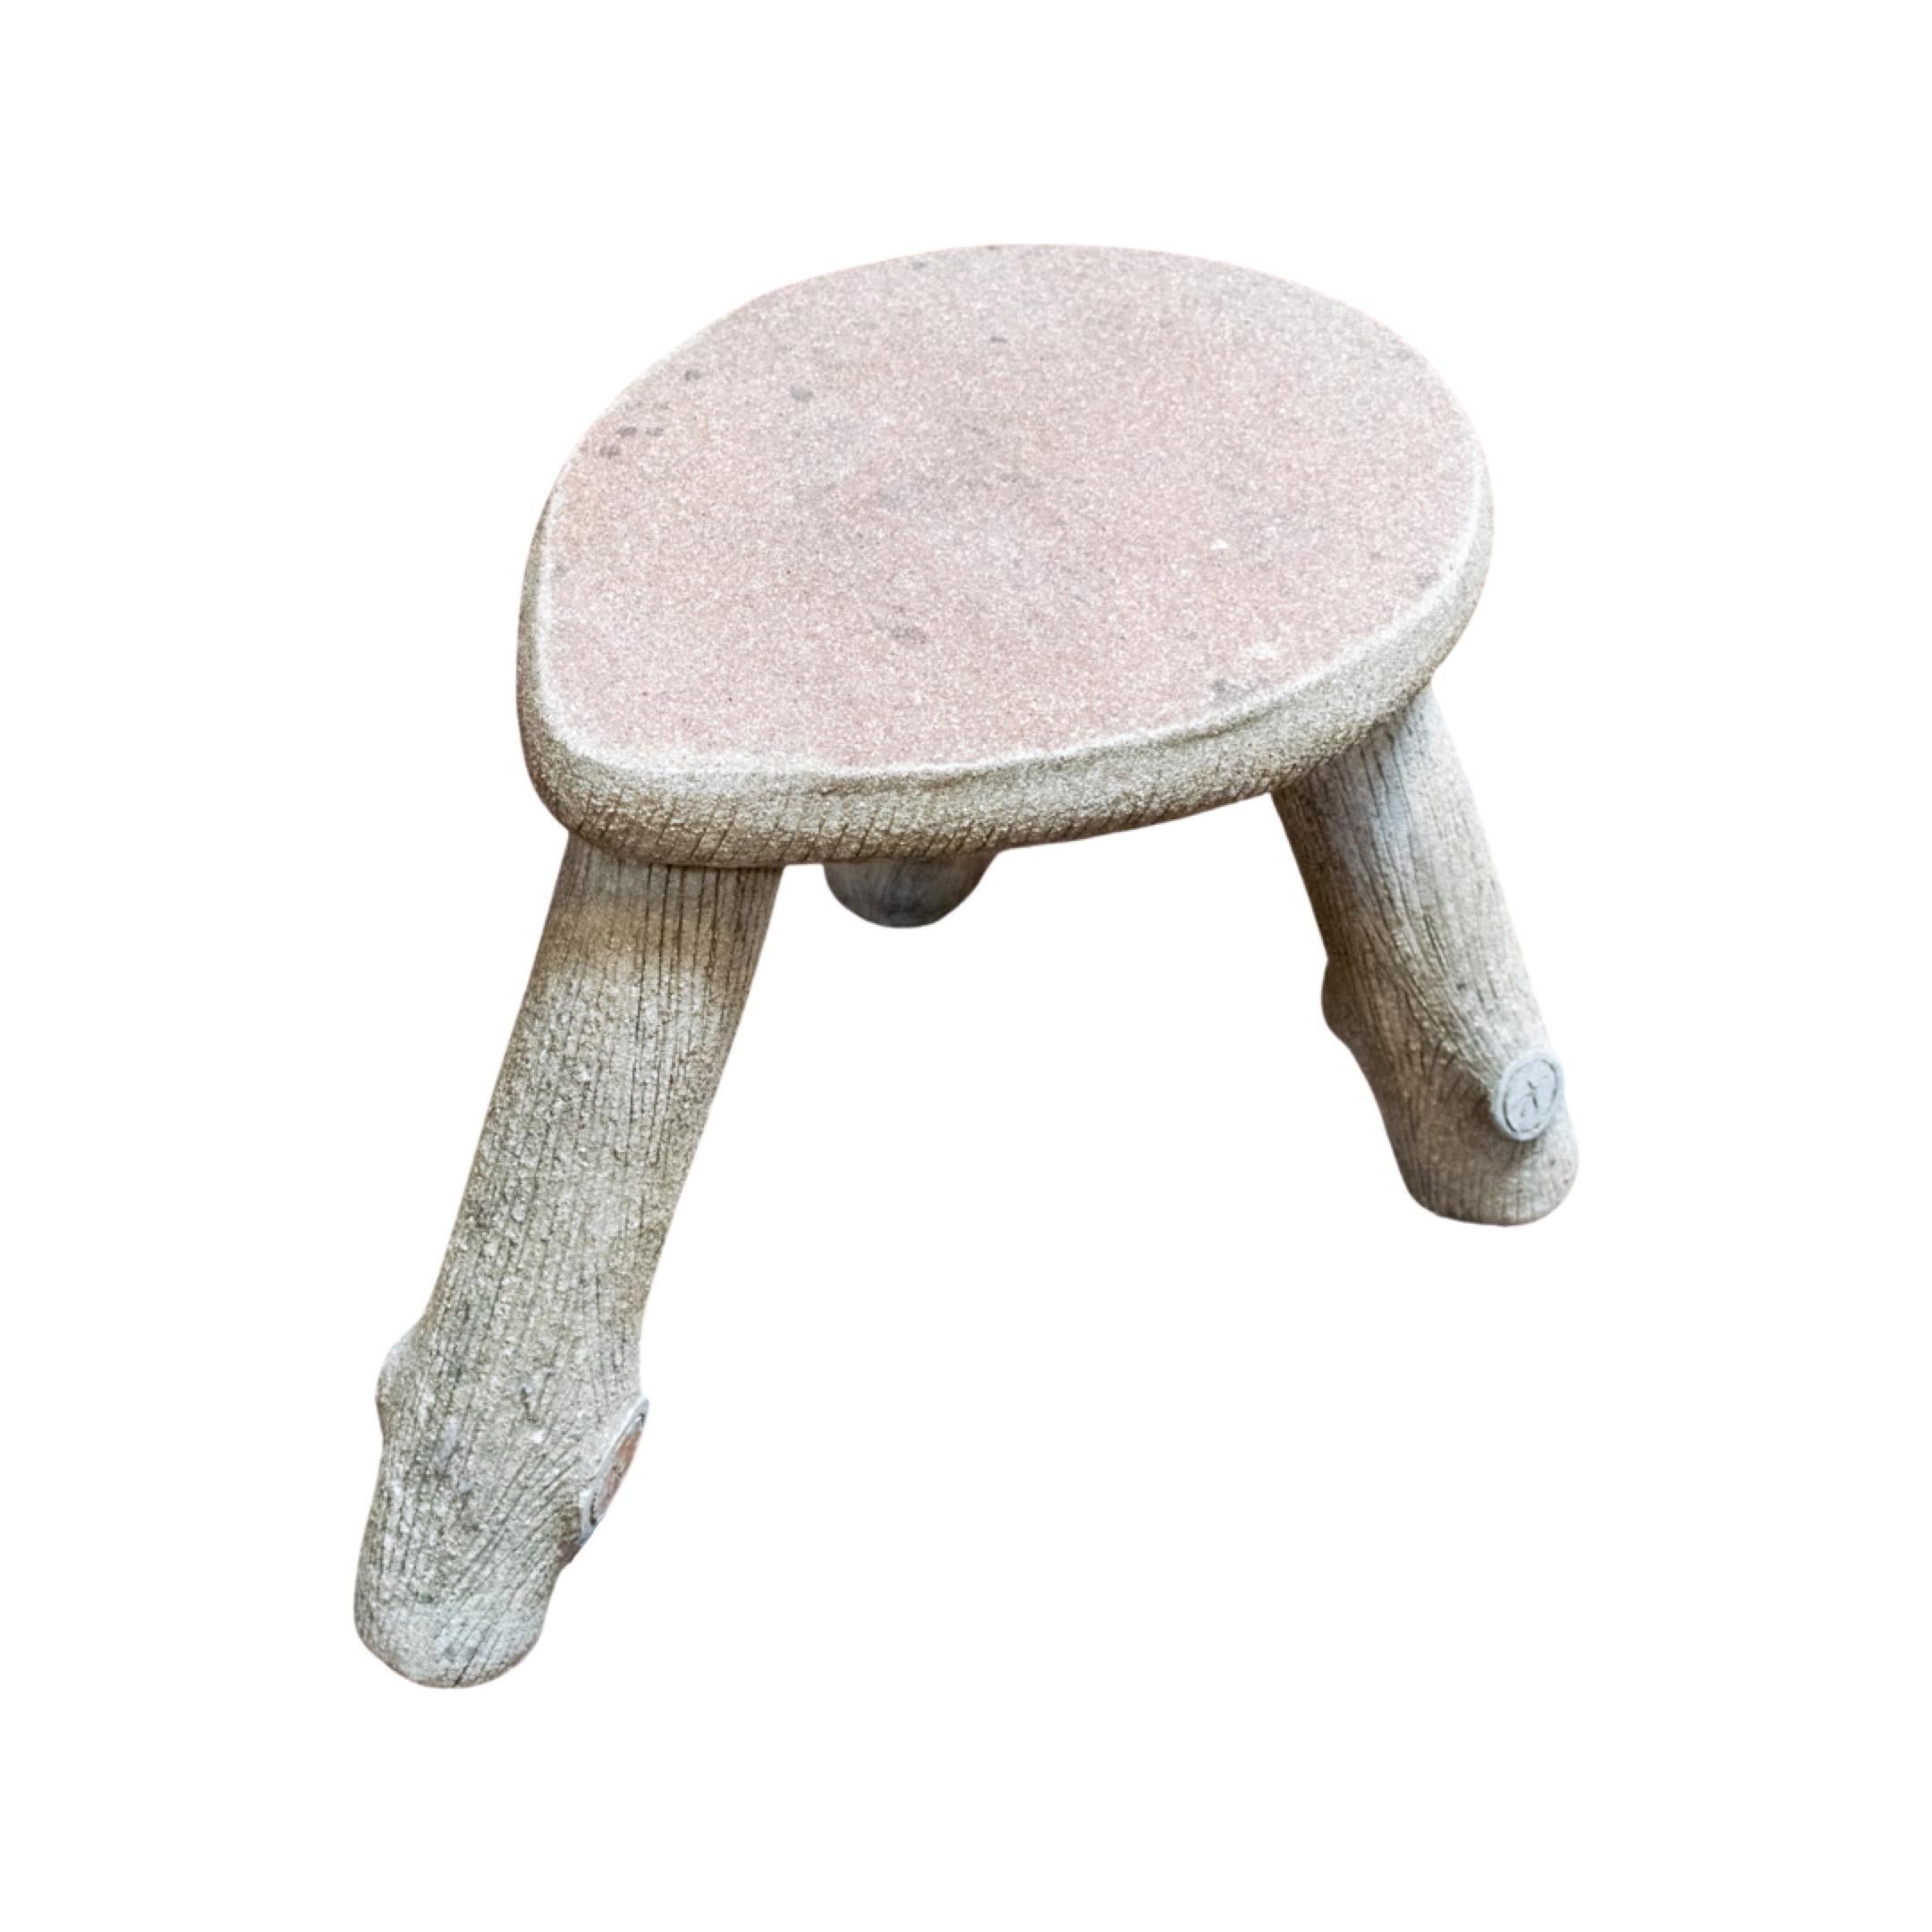 This 19th-century French Faux Bois Stool is the perfect addition to your garden exterior. Crafted with a unique process in France, it adds a timeless rustic charm to any outdoor setting. This sturdy stool is perfect for seating or display.